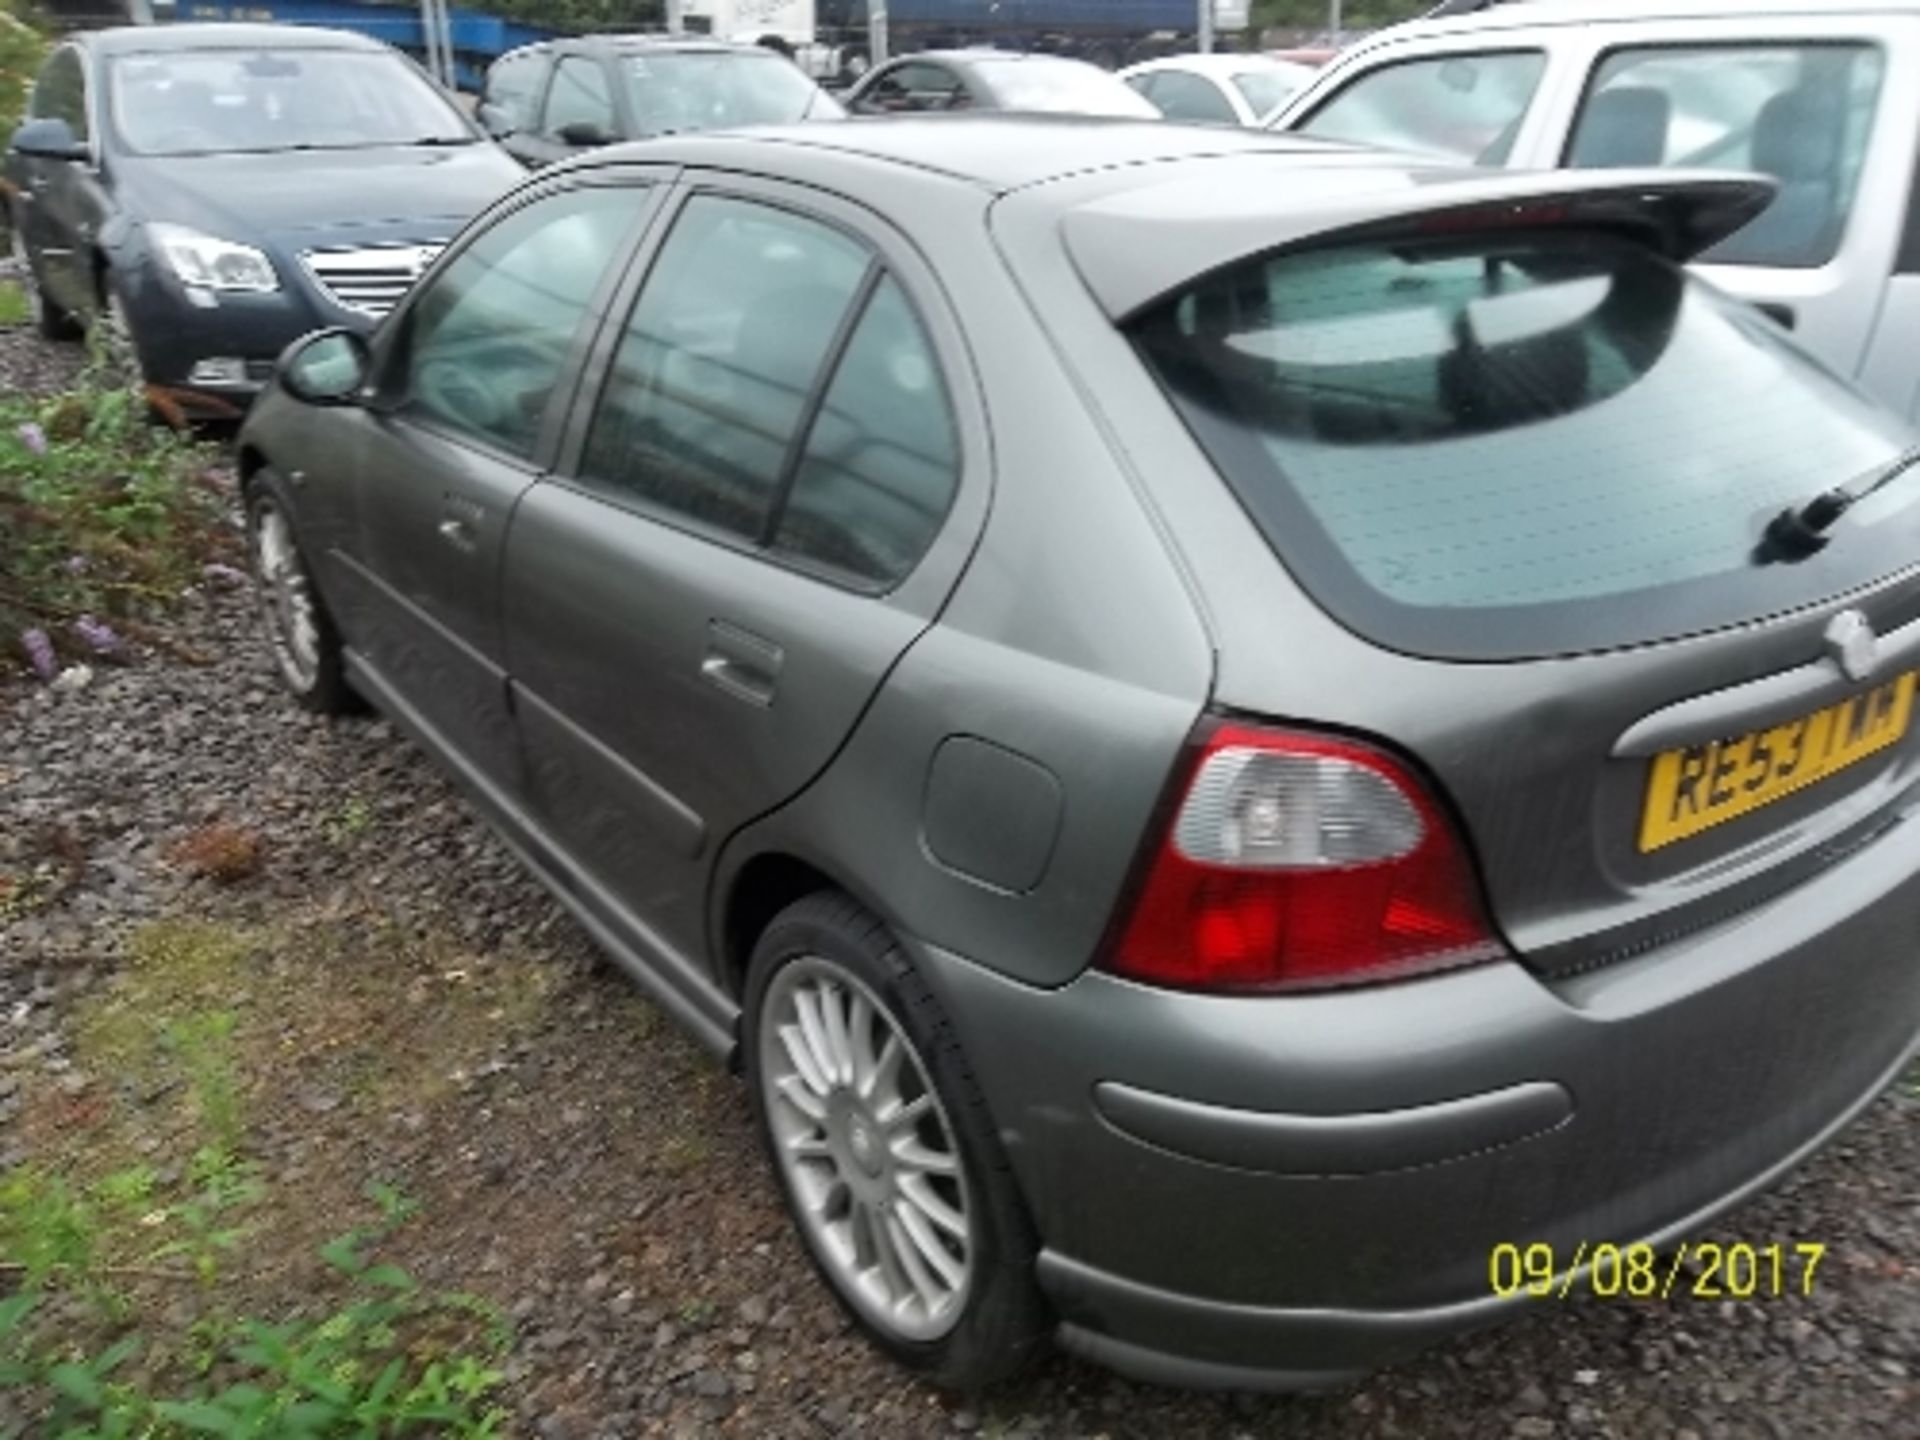 MG ZR+ - RE53 TWM Date of registration: 01.09.2003 1796cc, petrol, manual, grey Odometer reading - Image 4 of 4